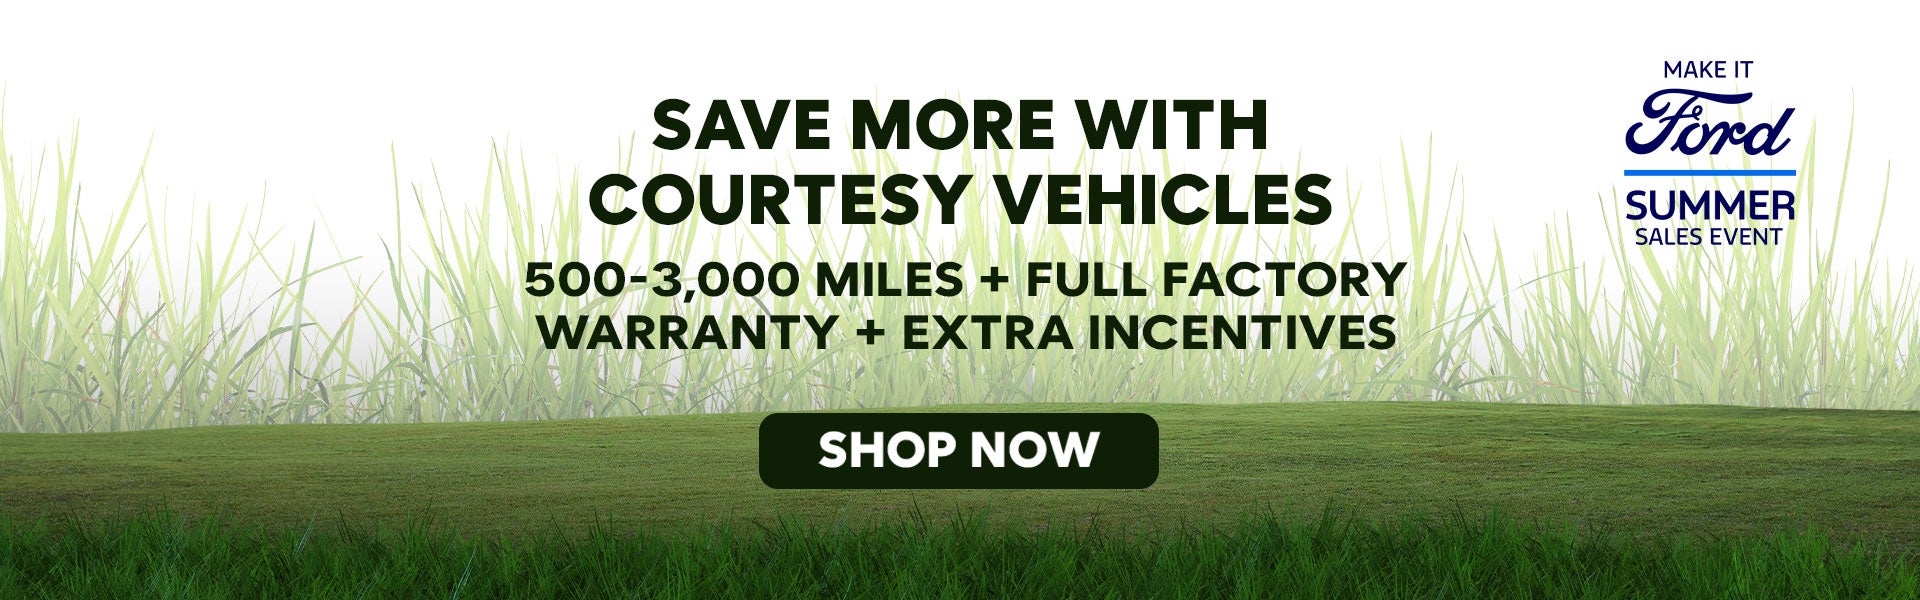 Save More With Courtesy Vehicles